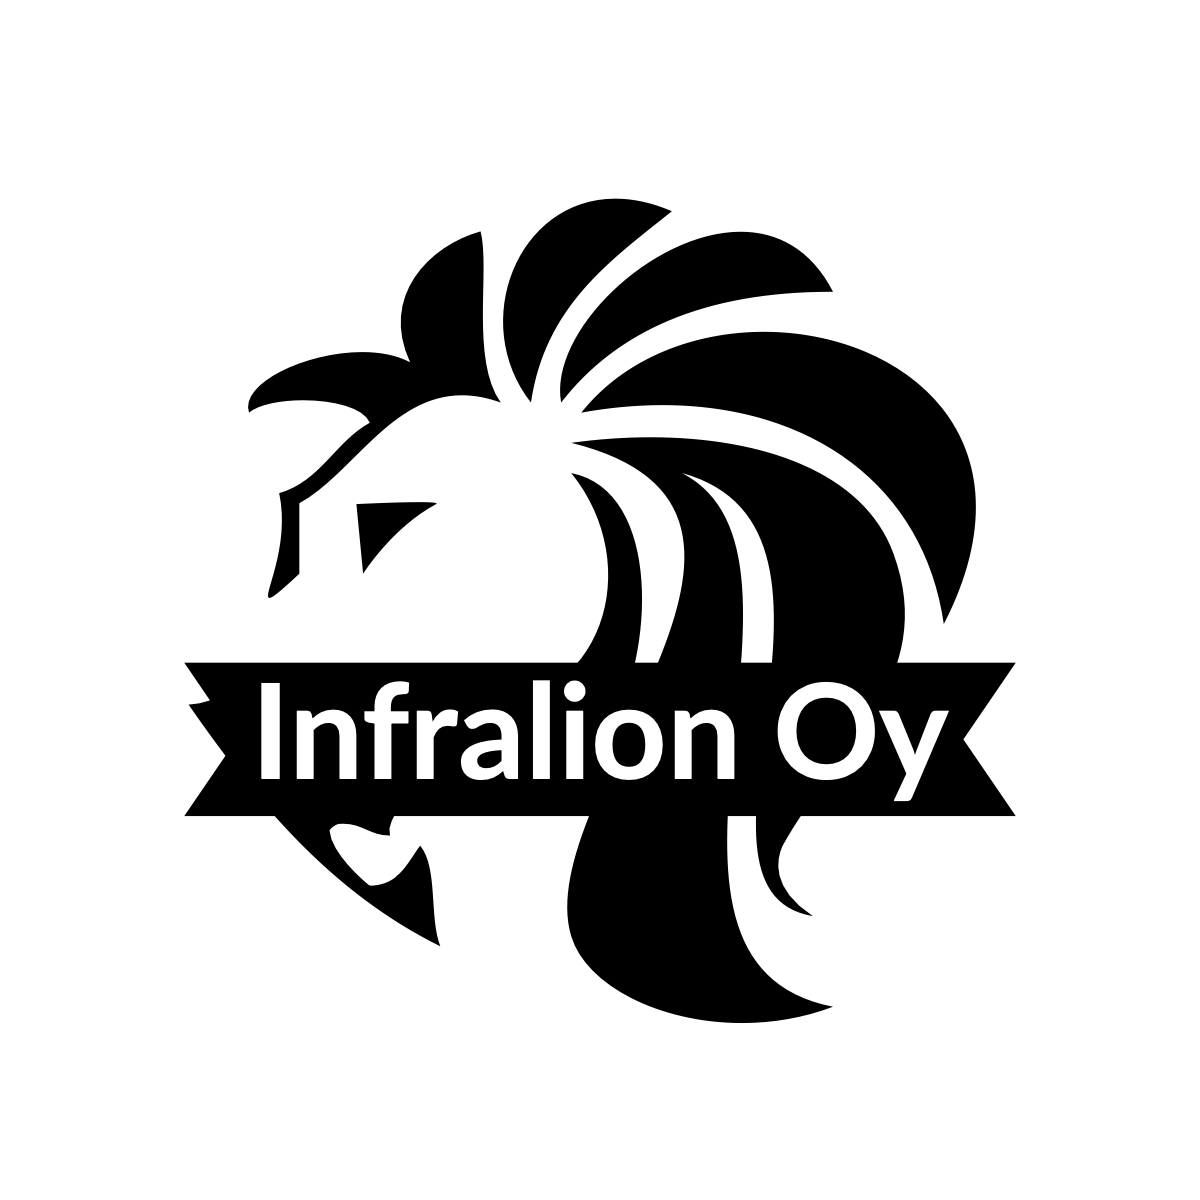 Infralion Oy